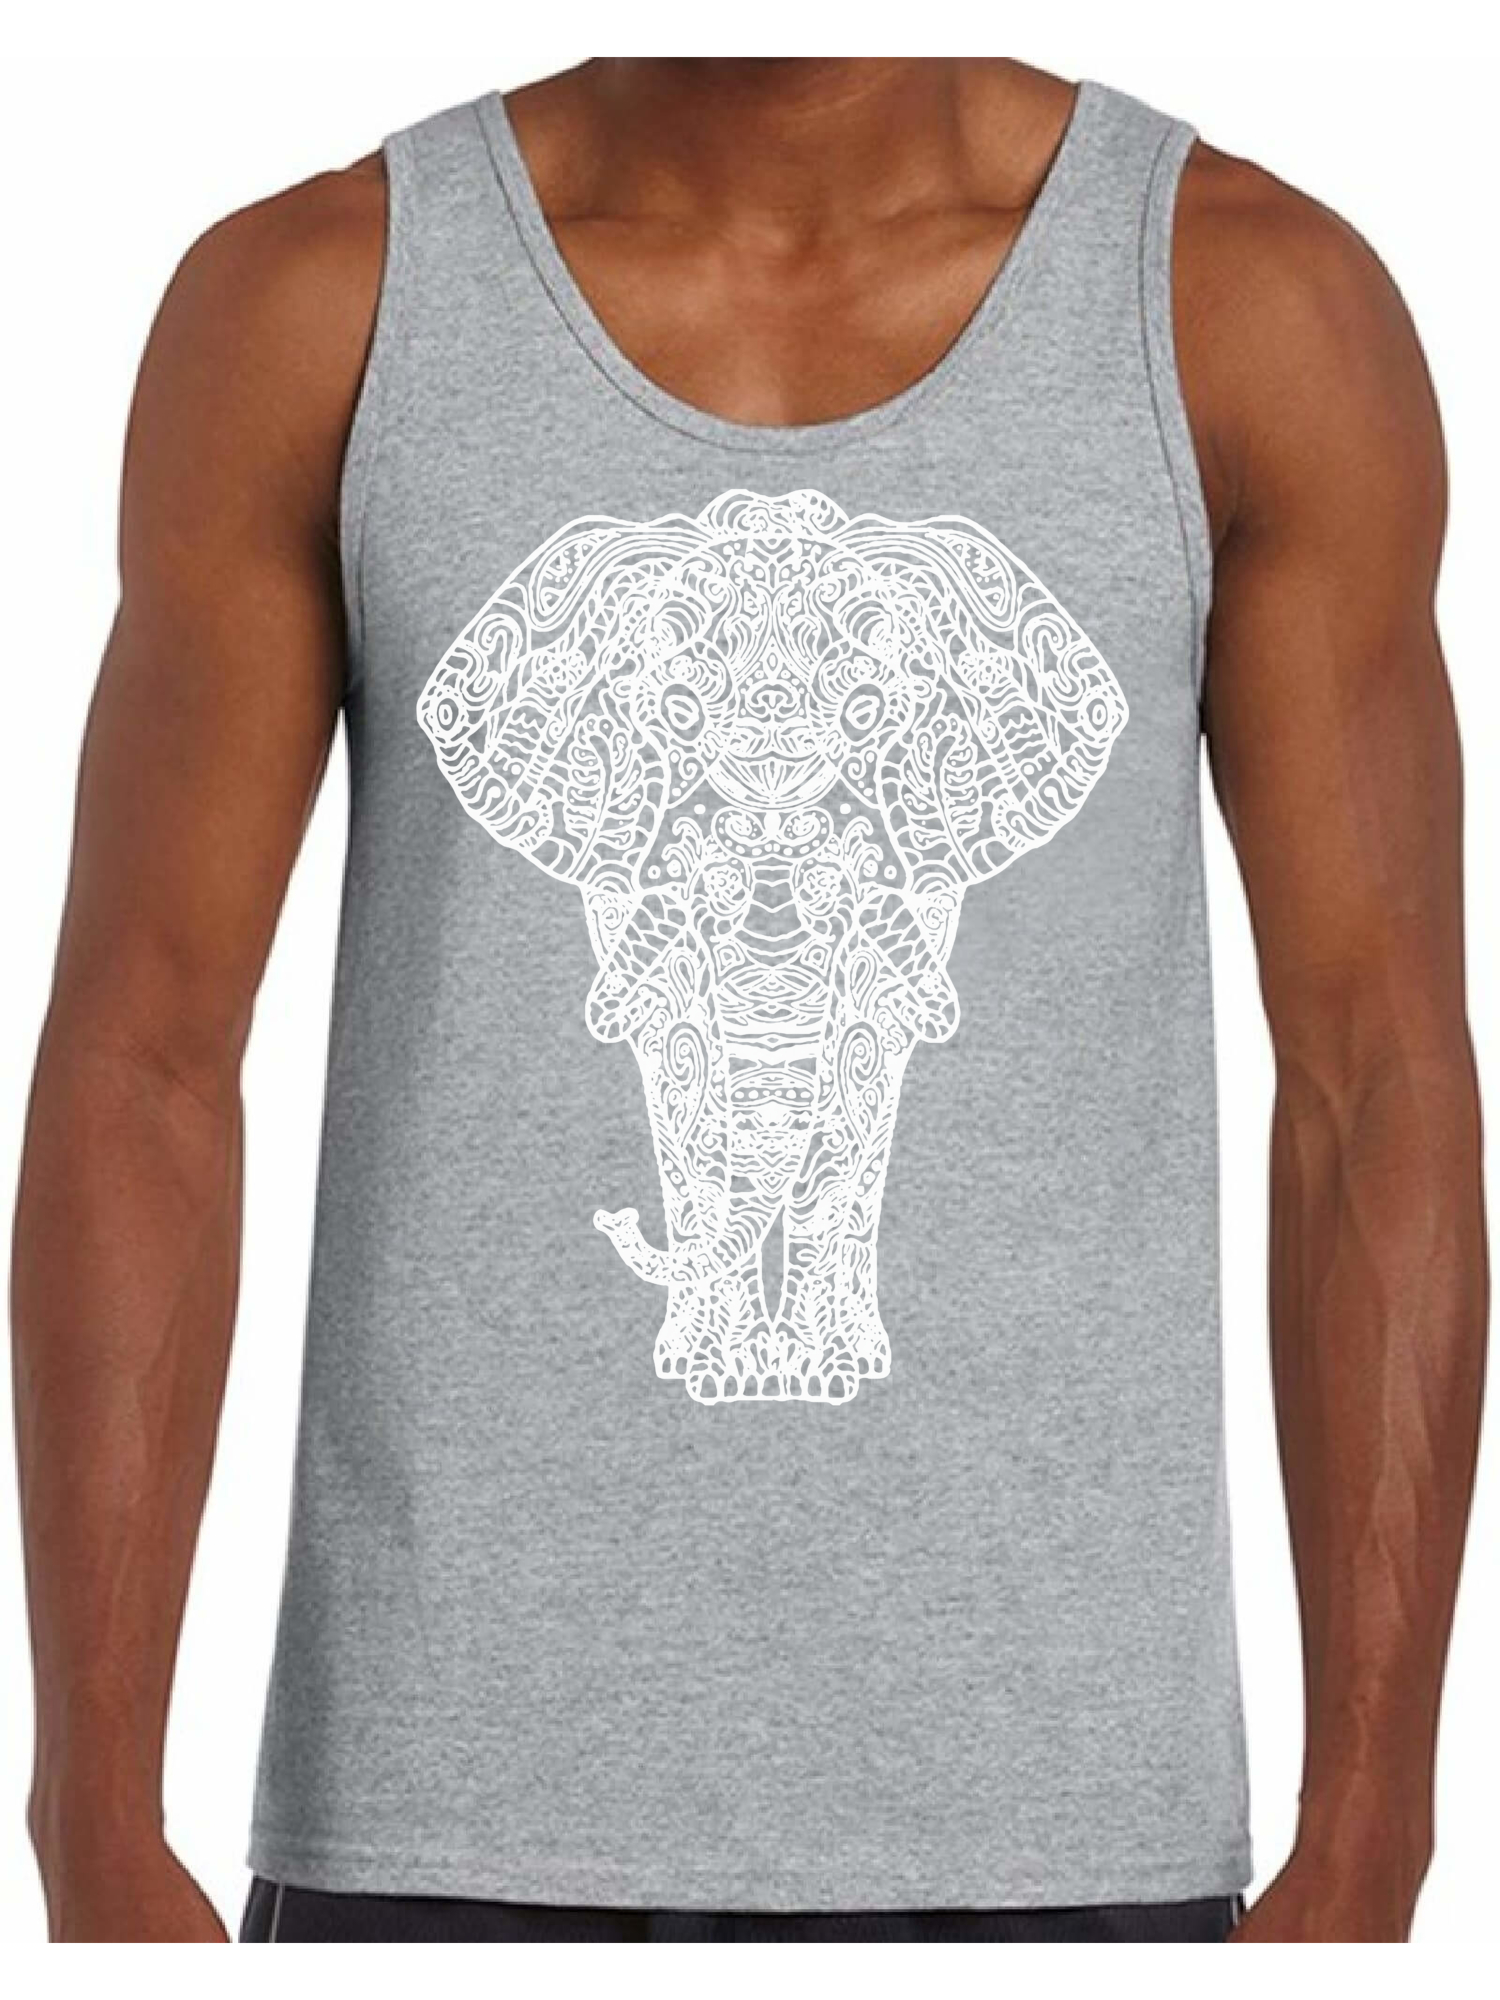 Awkward Styles Elephant Tank Top for Men Patterned Tanks for Men Men's Fashion Collection Tracery Tank Top for Dad Indian Pattern T-Shirt for Men Gifts for Husband Elephant Shirts Animal T-Shirt - image 1 of 4